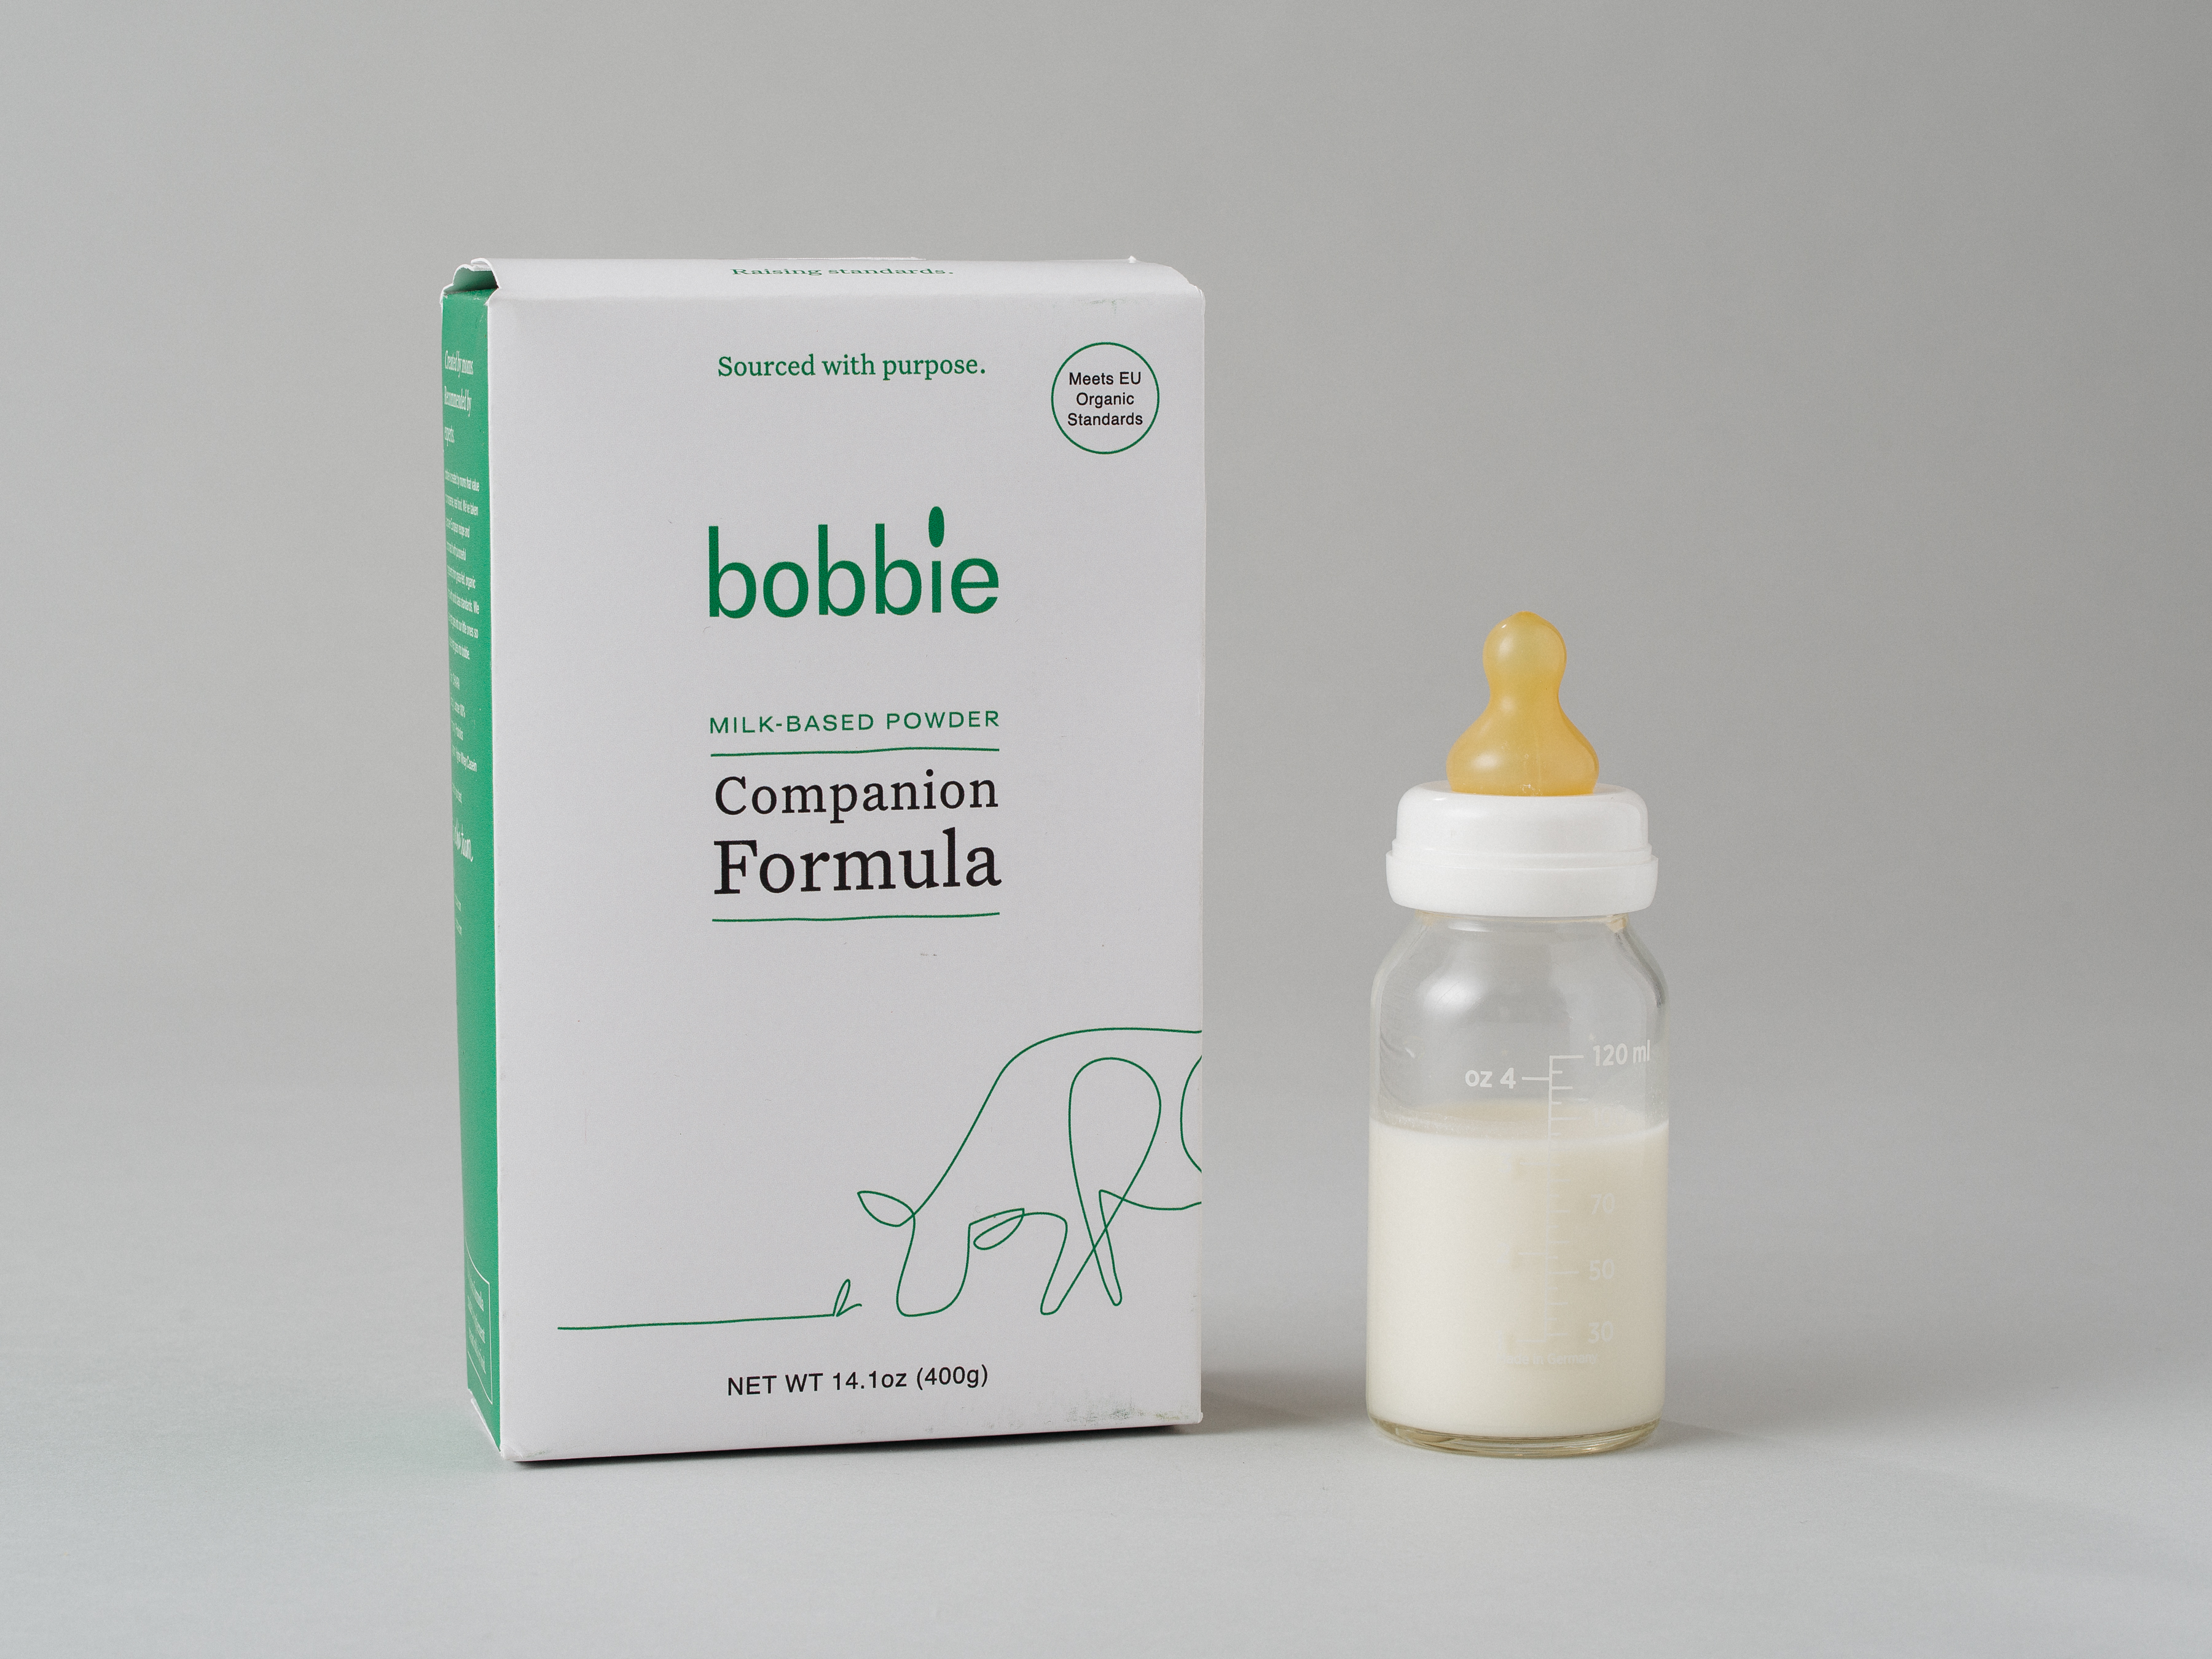 Bobbie - baby food delivery startup